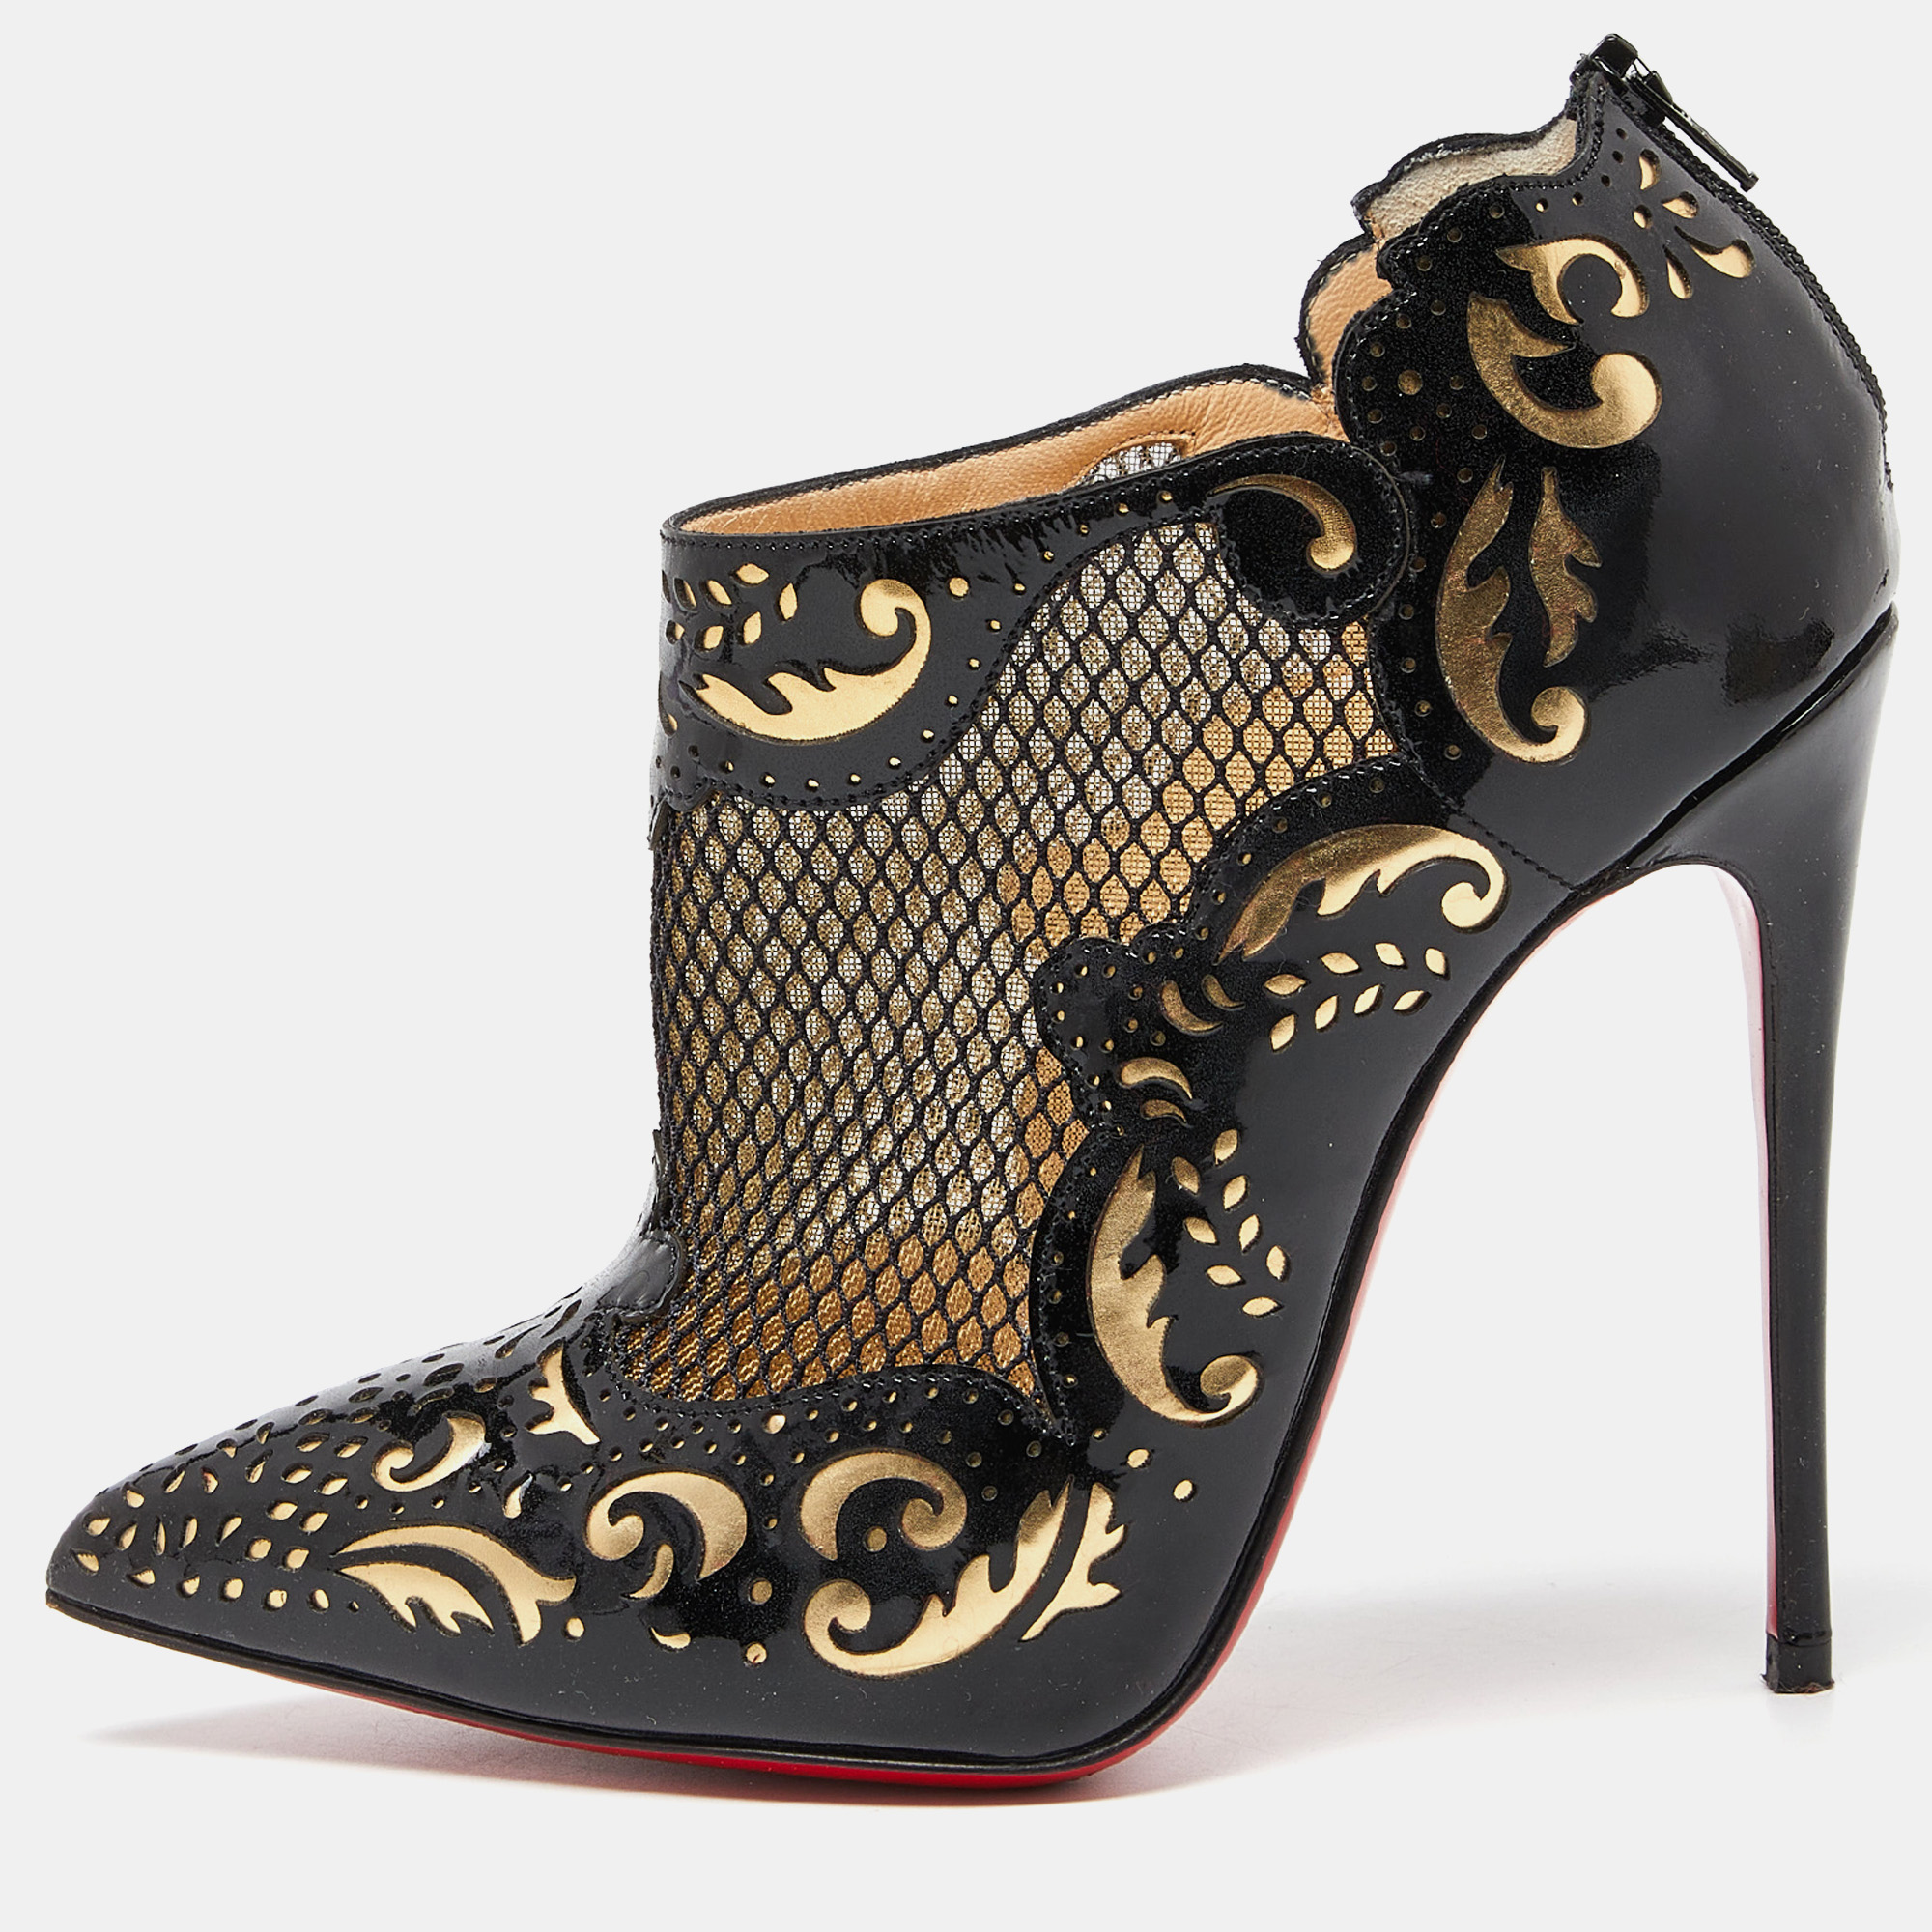 Pre-owned Christian Louboutin Black/gold Laser Cut Patent Leather Mandolina Booties Size 35